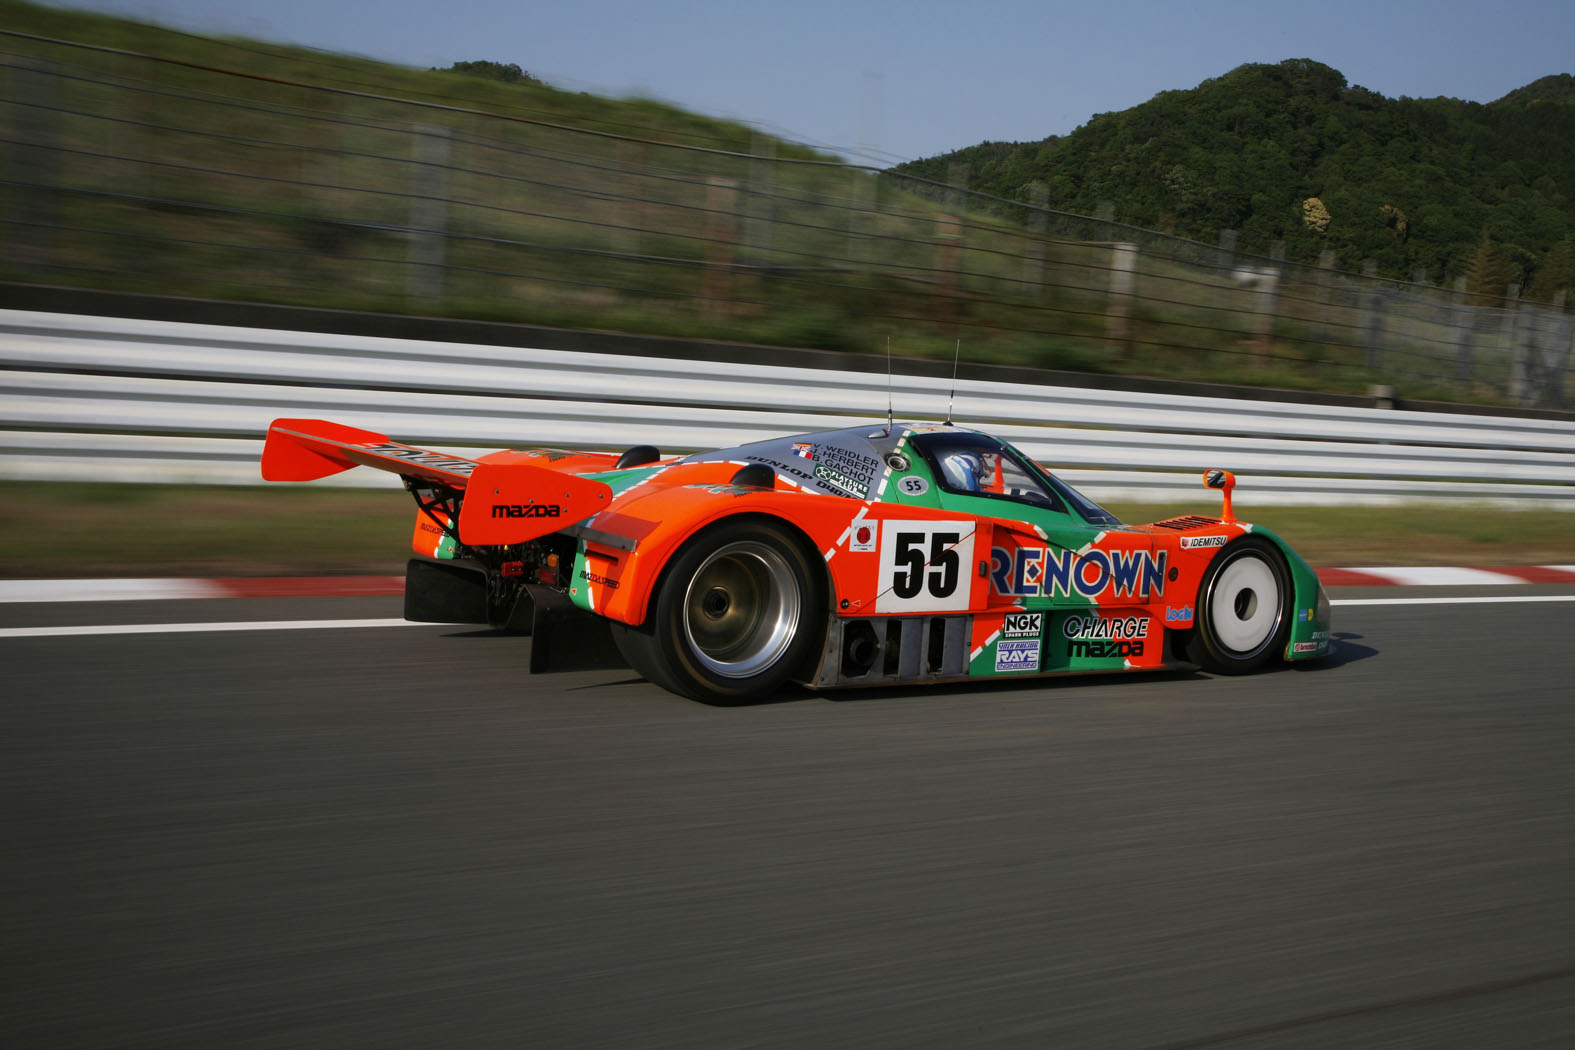 Mazda 787b Backgrounds, Compatible - PC, Mobile, Gadgets| 1575x1050 px